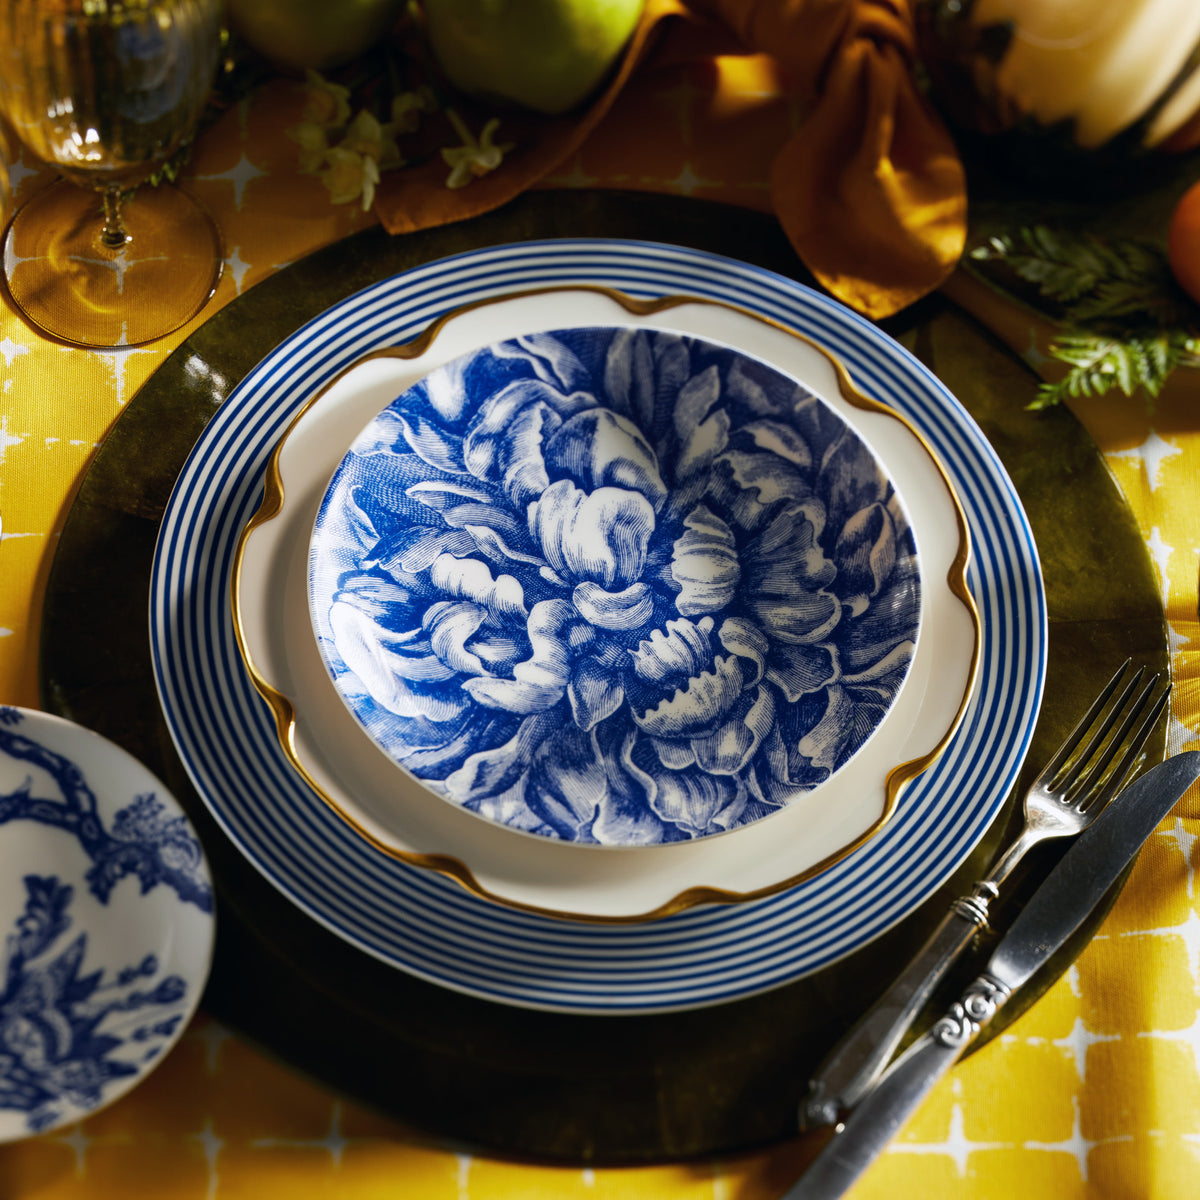 A table setting with a blue floral-patterned plate on top of a gold-rimmed white high-fired porcelain plate, all placed on a dark Newport Rimmed Charger Plate by Caskata Artisanal Home with a fork and knife on the right side. Yellow tablecloth in the background.